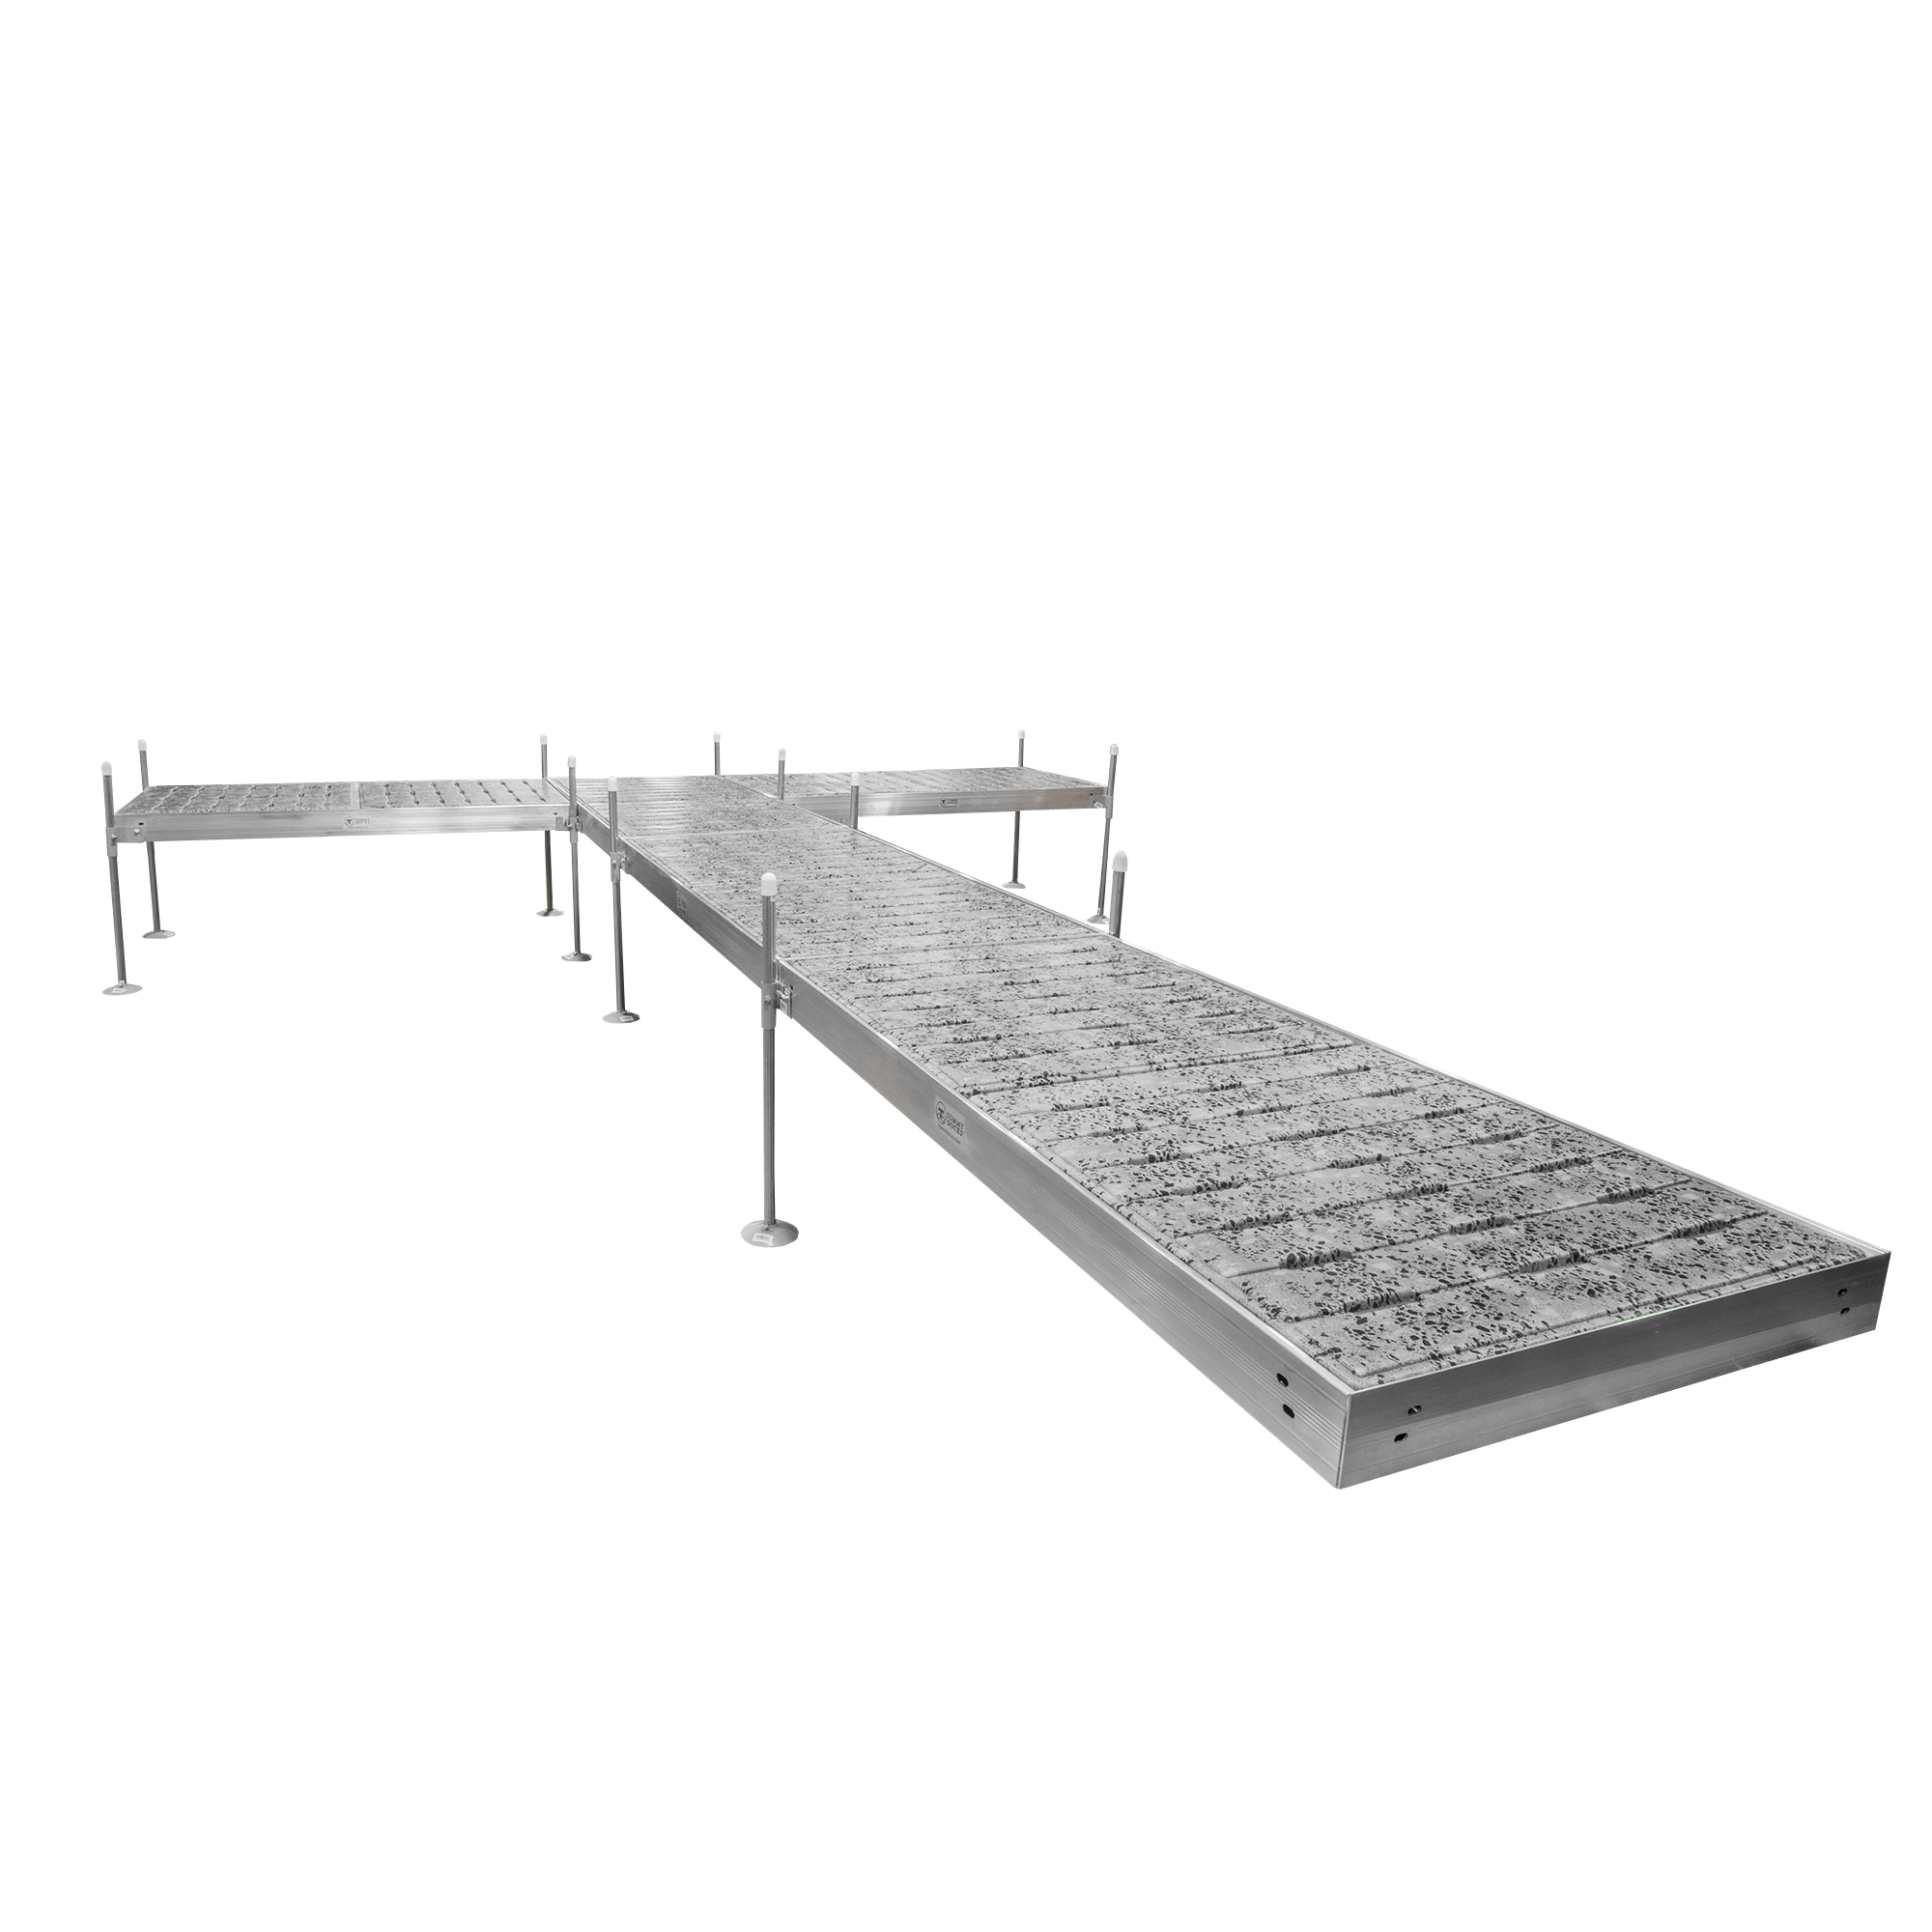 24' T-Shaped Boat Dock System with Aluminum Frame and Thermoformed Terrazzo Decking